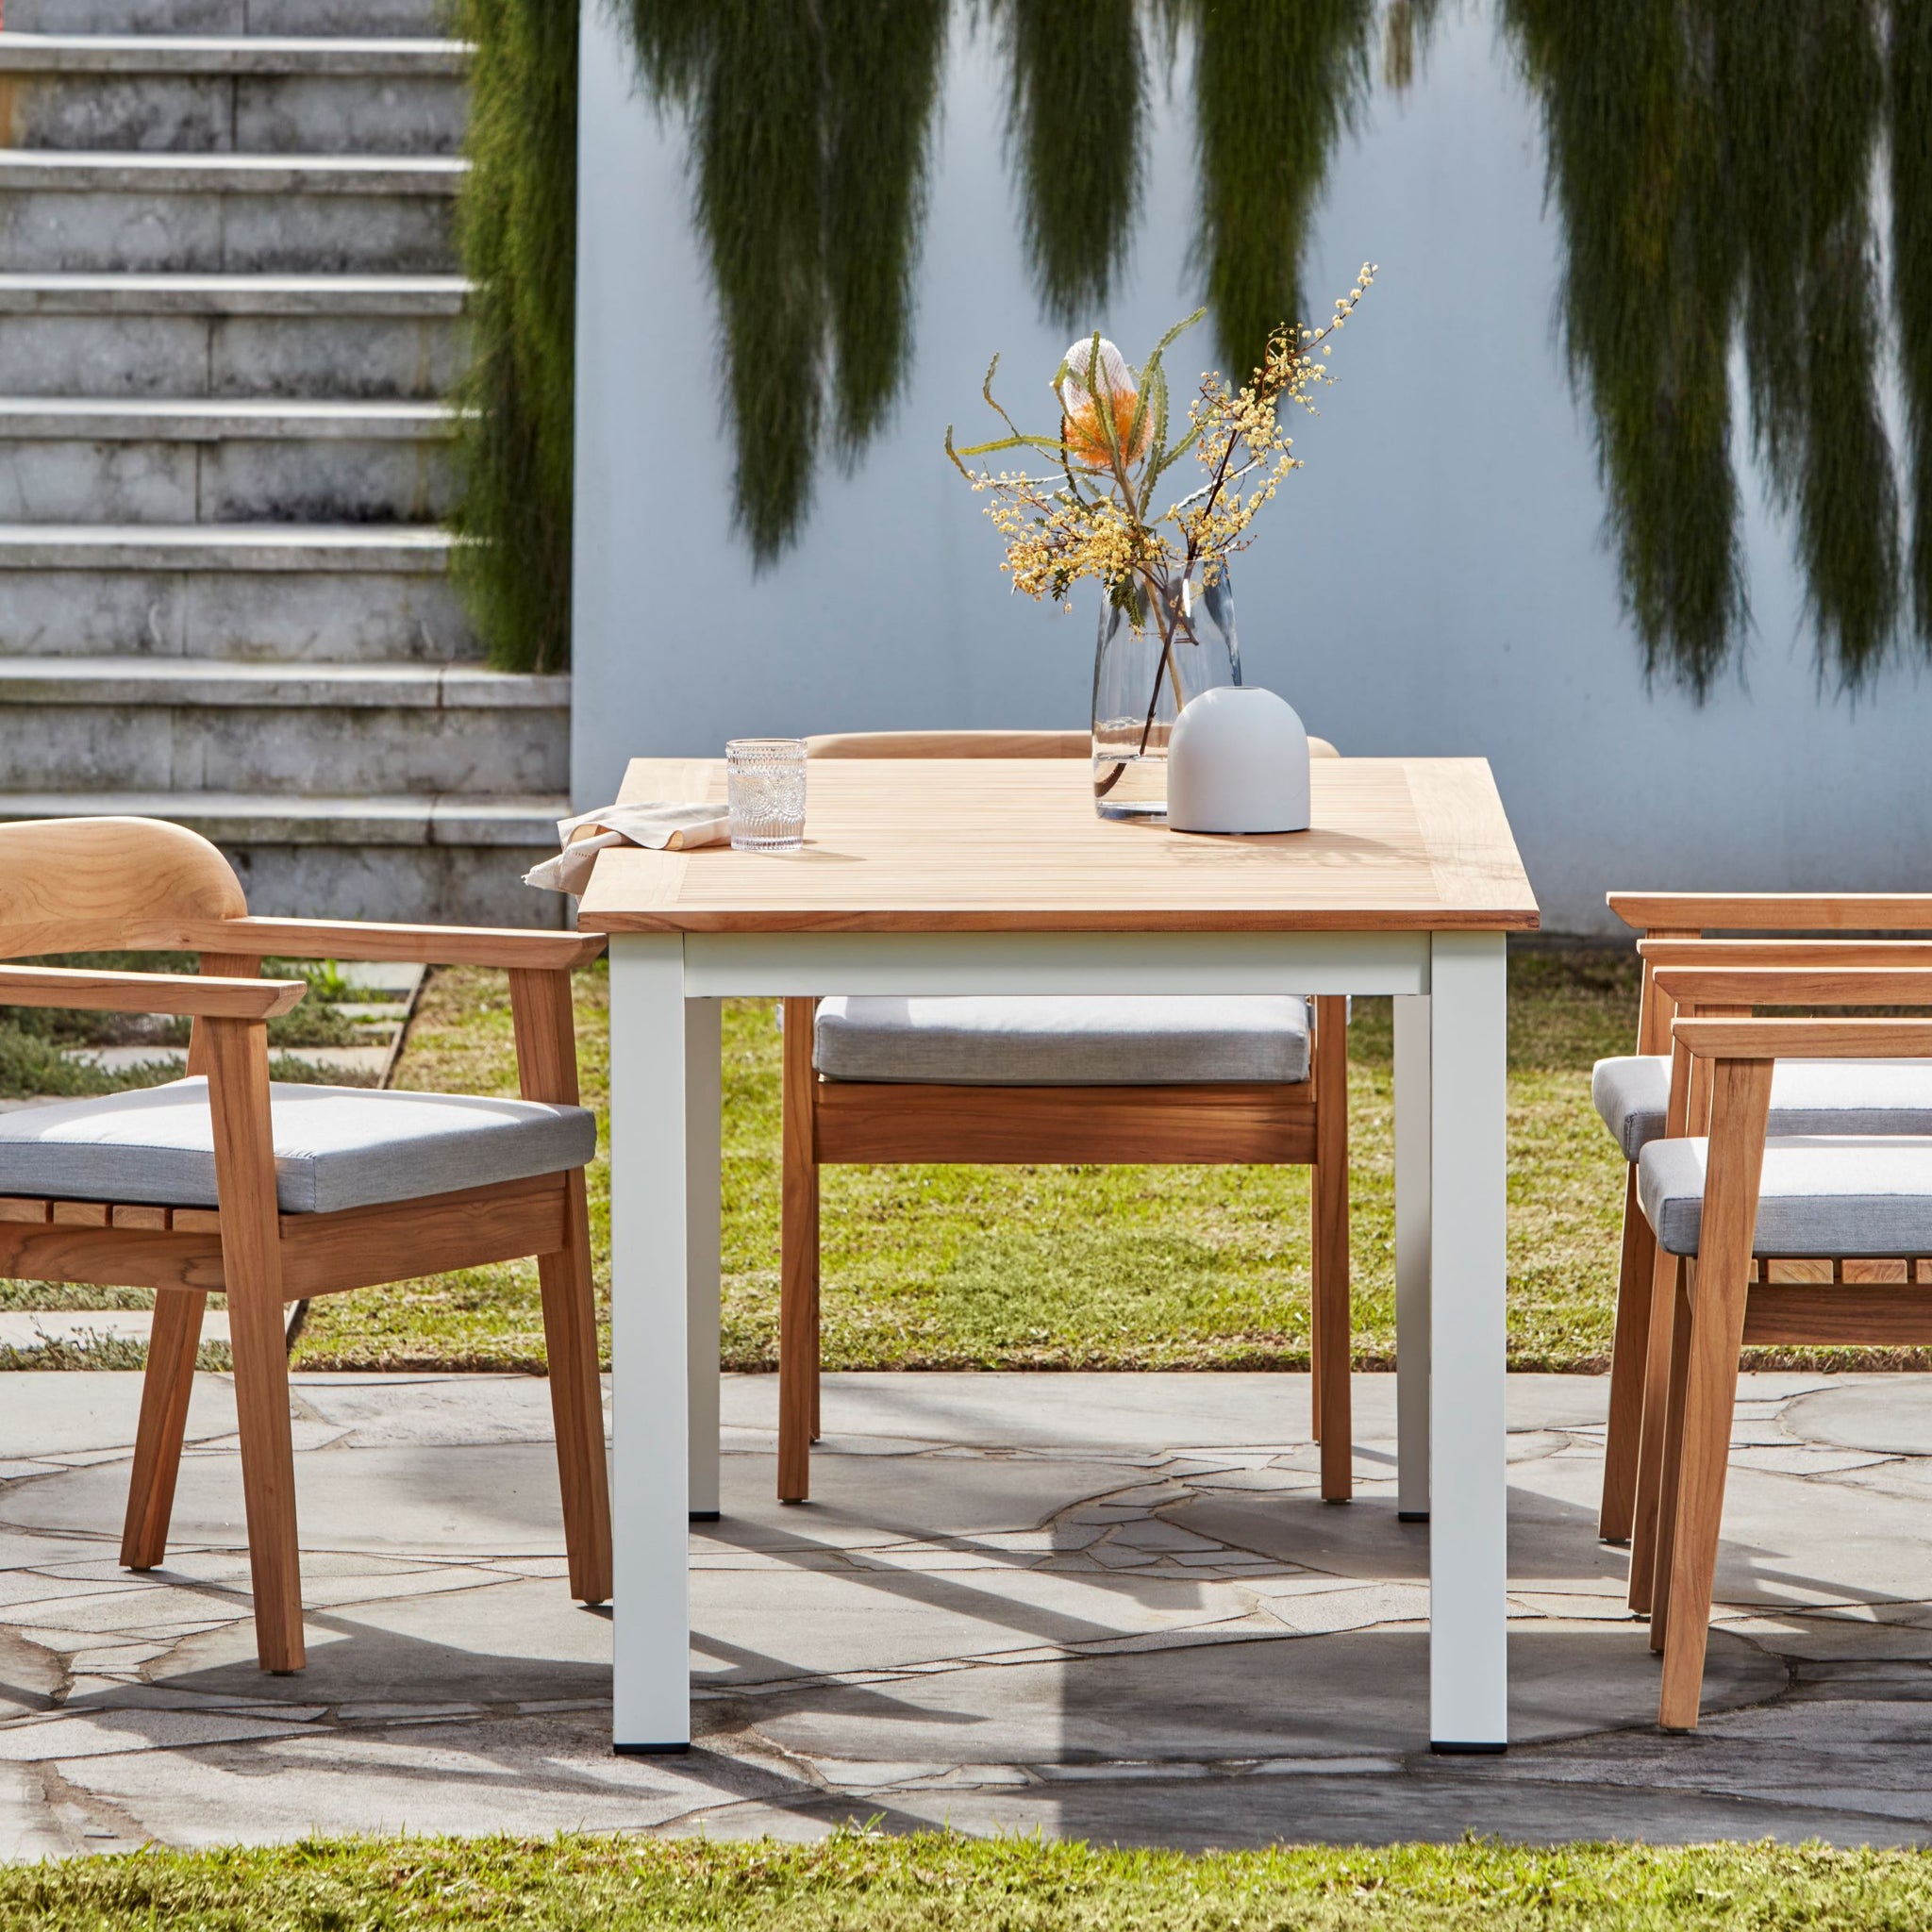 Rome Teak Outdoor Dining Chair